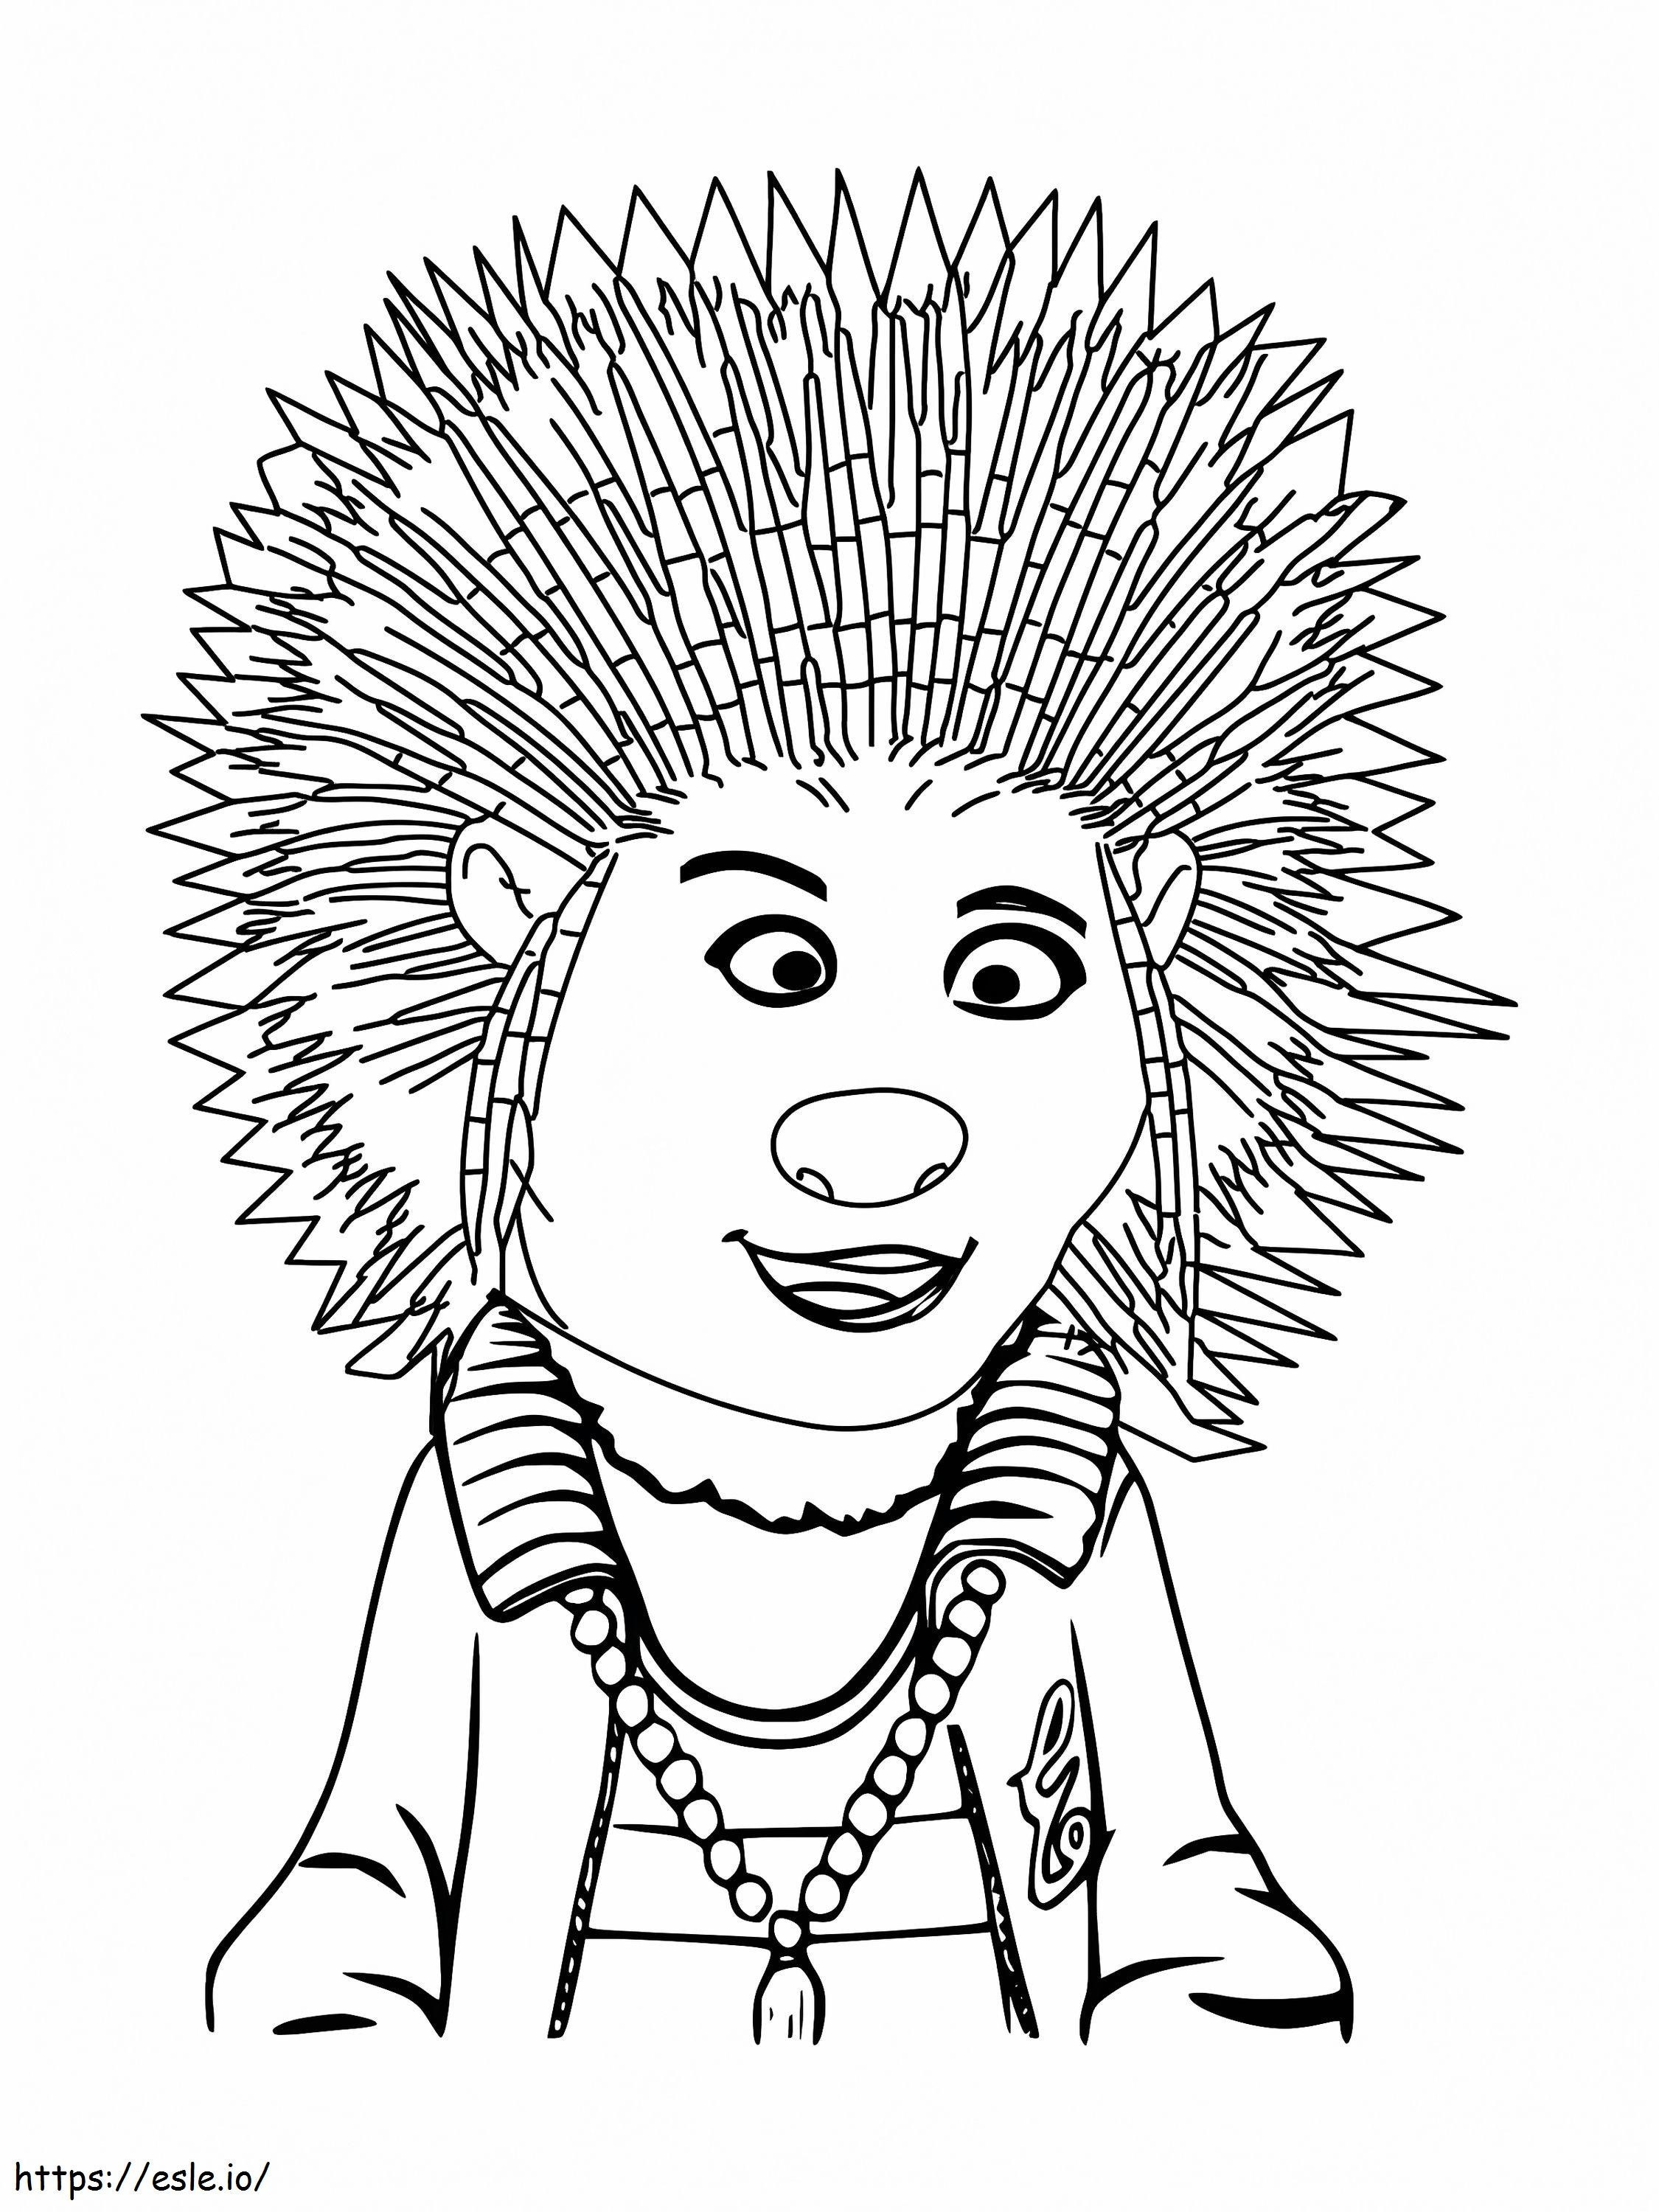 Pop Star Ash From Sing coloring page